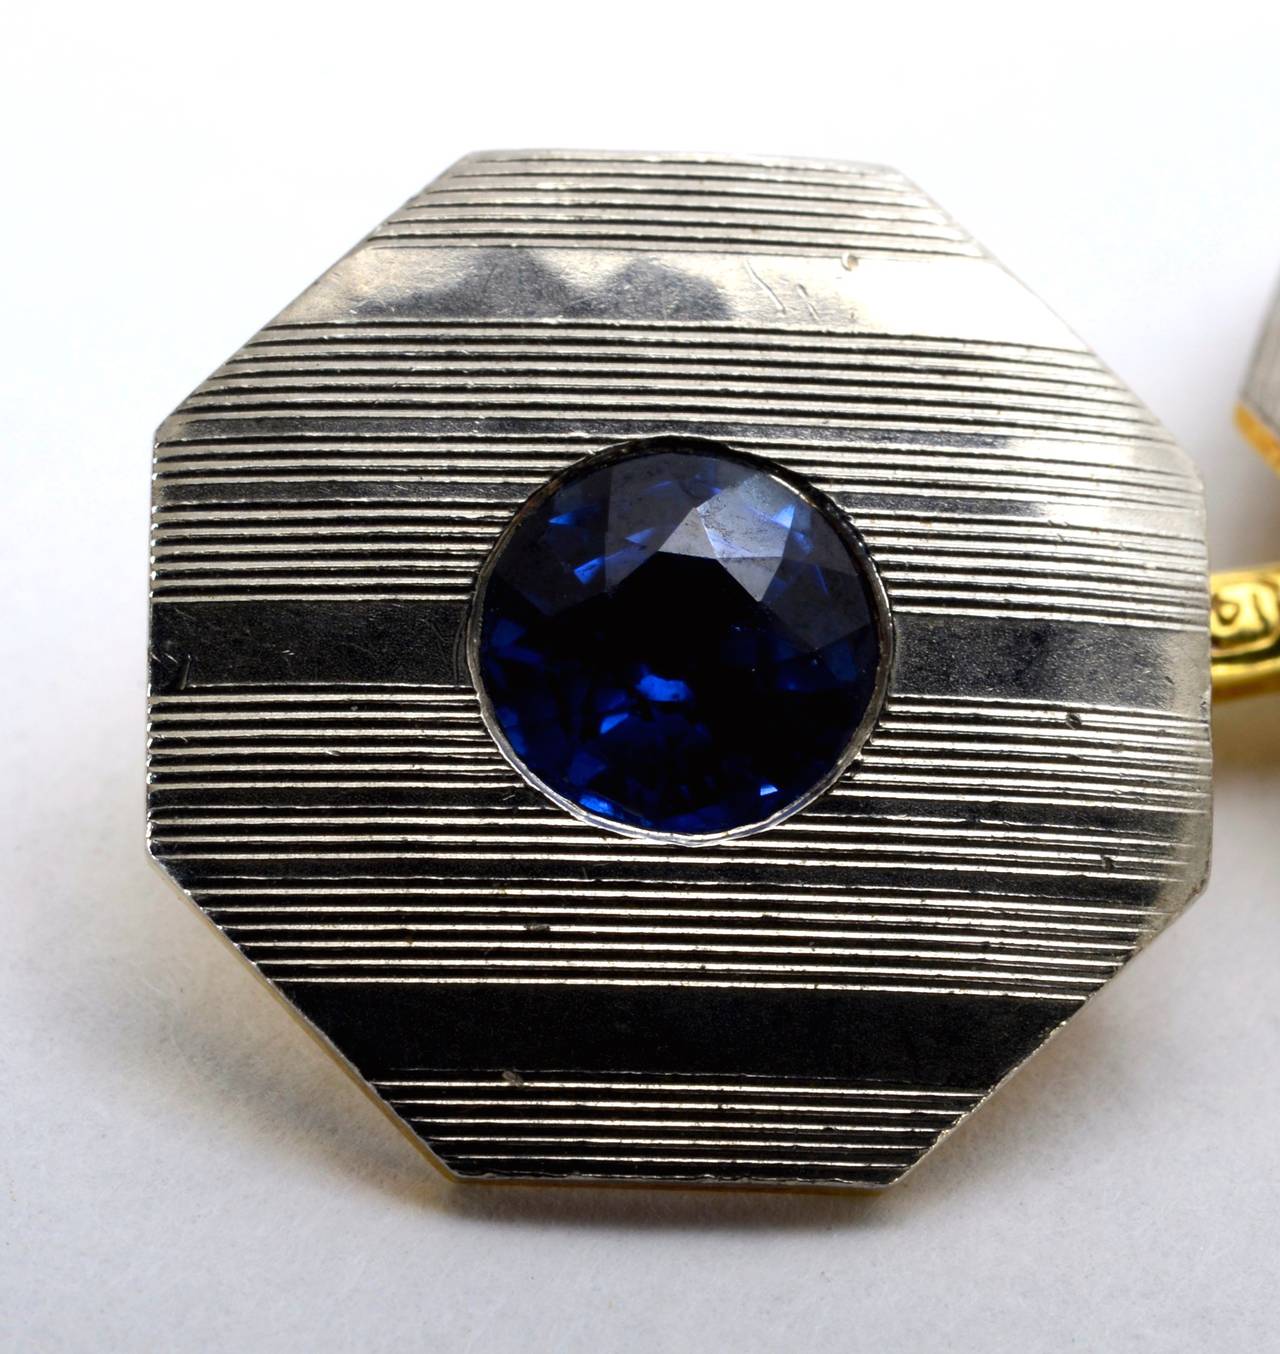 Blue Sapphire, Platinum and 18k Gold Art Deco Cufflinks c1925. Marked 'gold+plat.' The backs are 18k (tested) yellow gold with a gold connecting bar. The Platinum fronts with engraved decoration surround a round cut natural blue sapphire, each